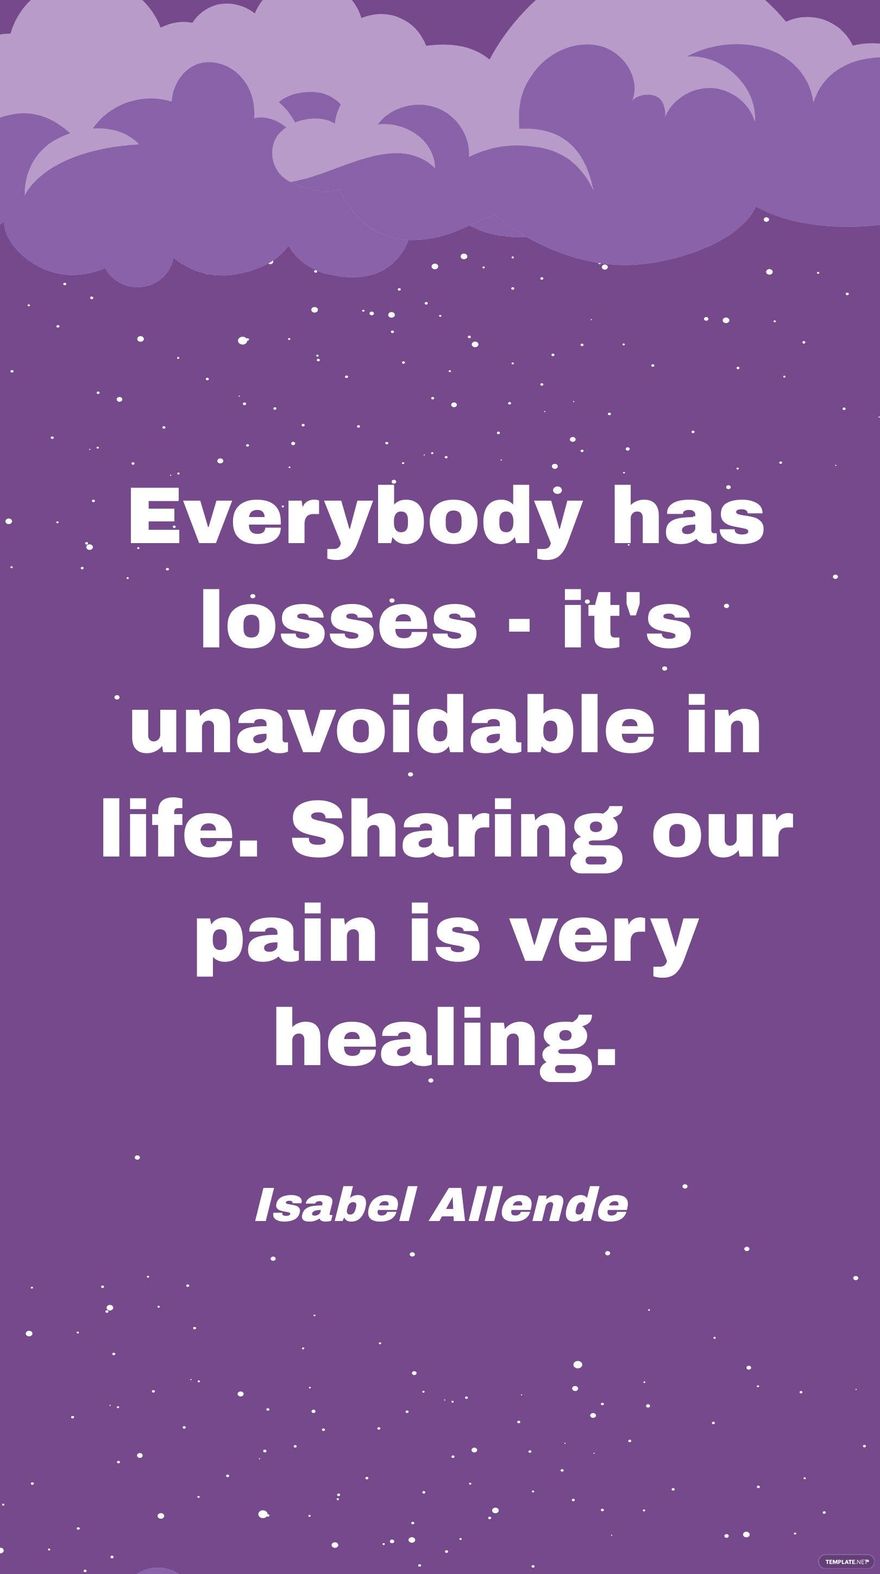 Isabel Allende - Everybody has losses - it's unavoidable in life. Sharing our pain is very healing. in JPG